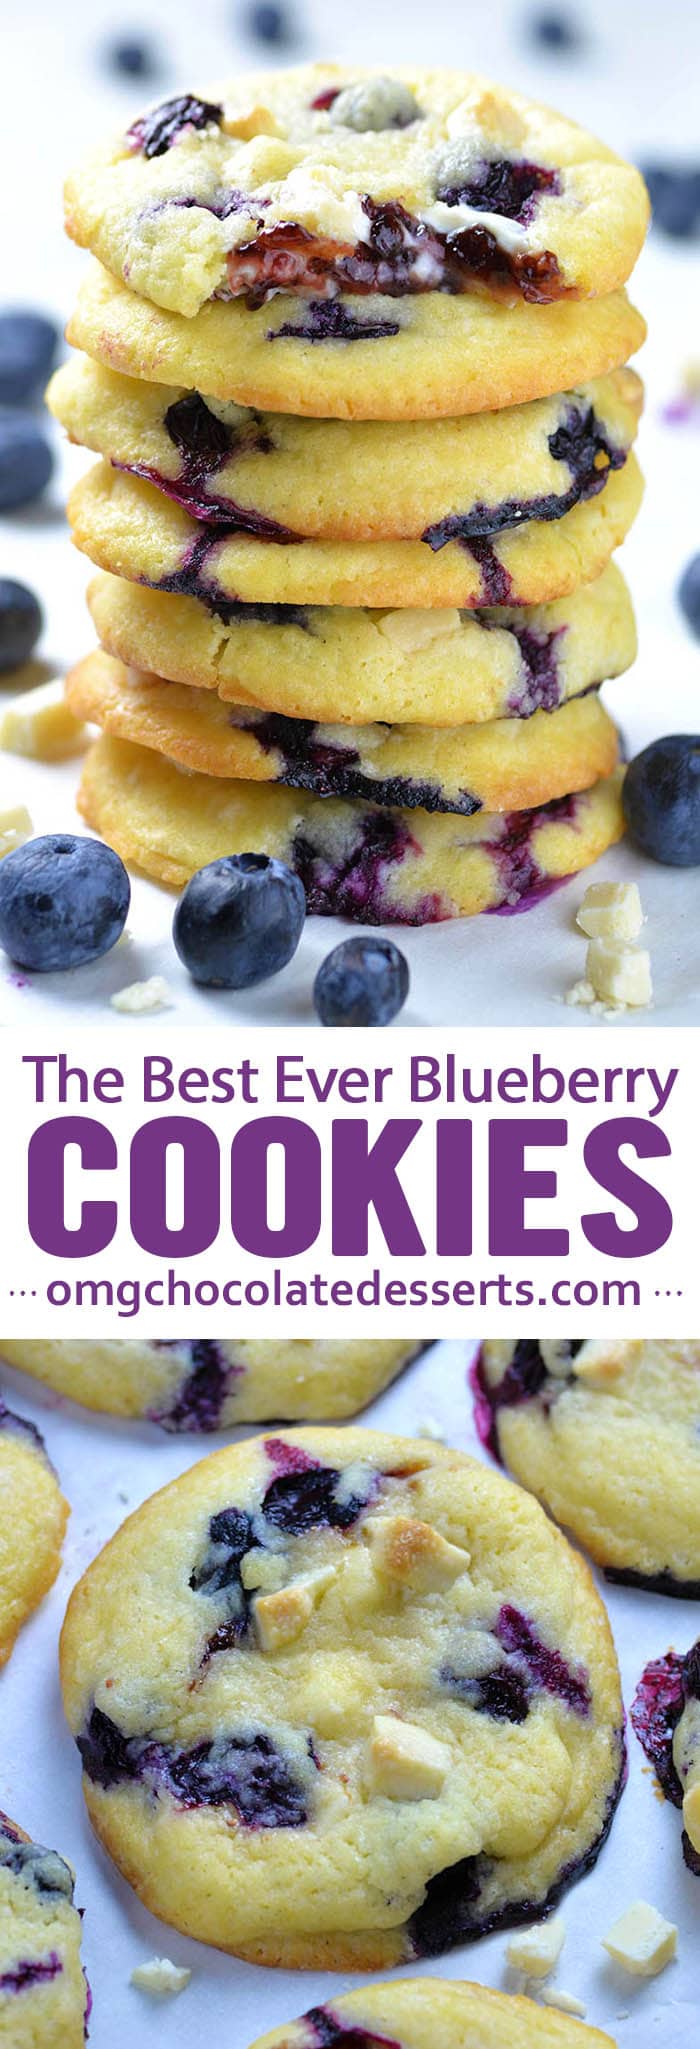 Best Ever Blueberry Cookies - OMG Chocolate Desserts